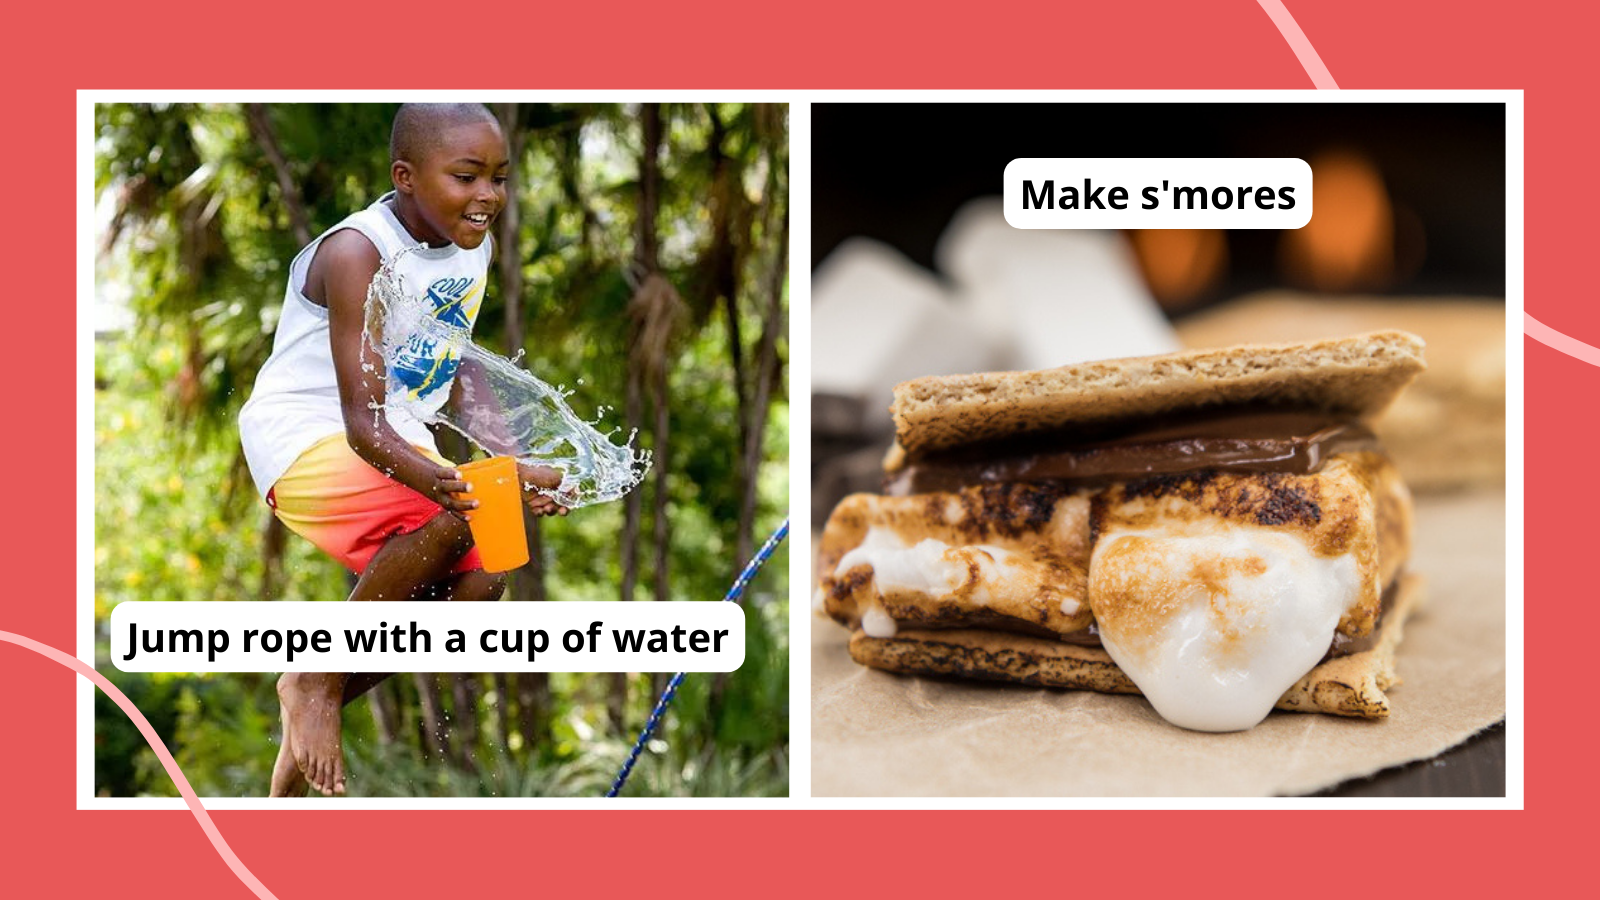 Summer camp activities including a boy jumping rope holding a cup of water and a s'more made on the campfire.